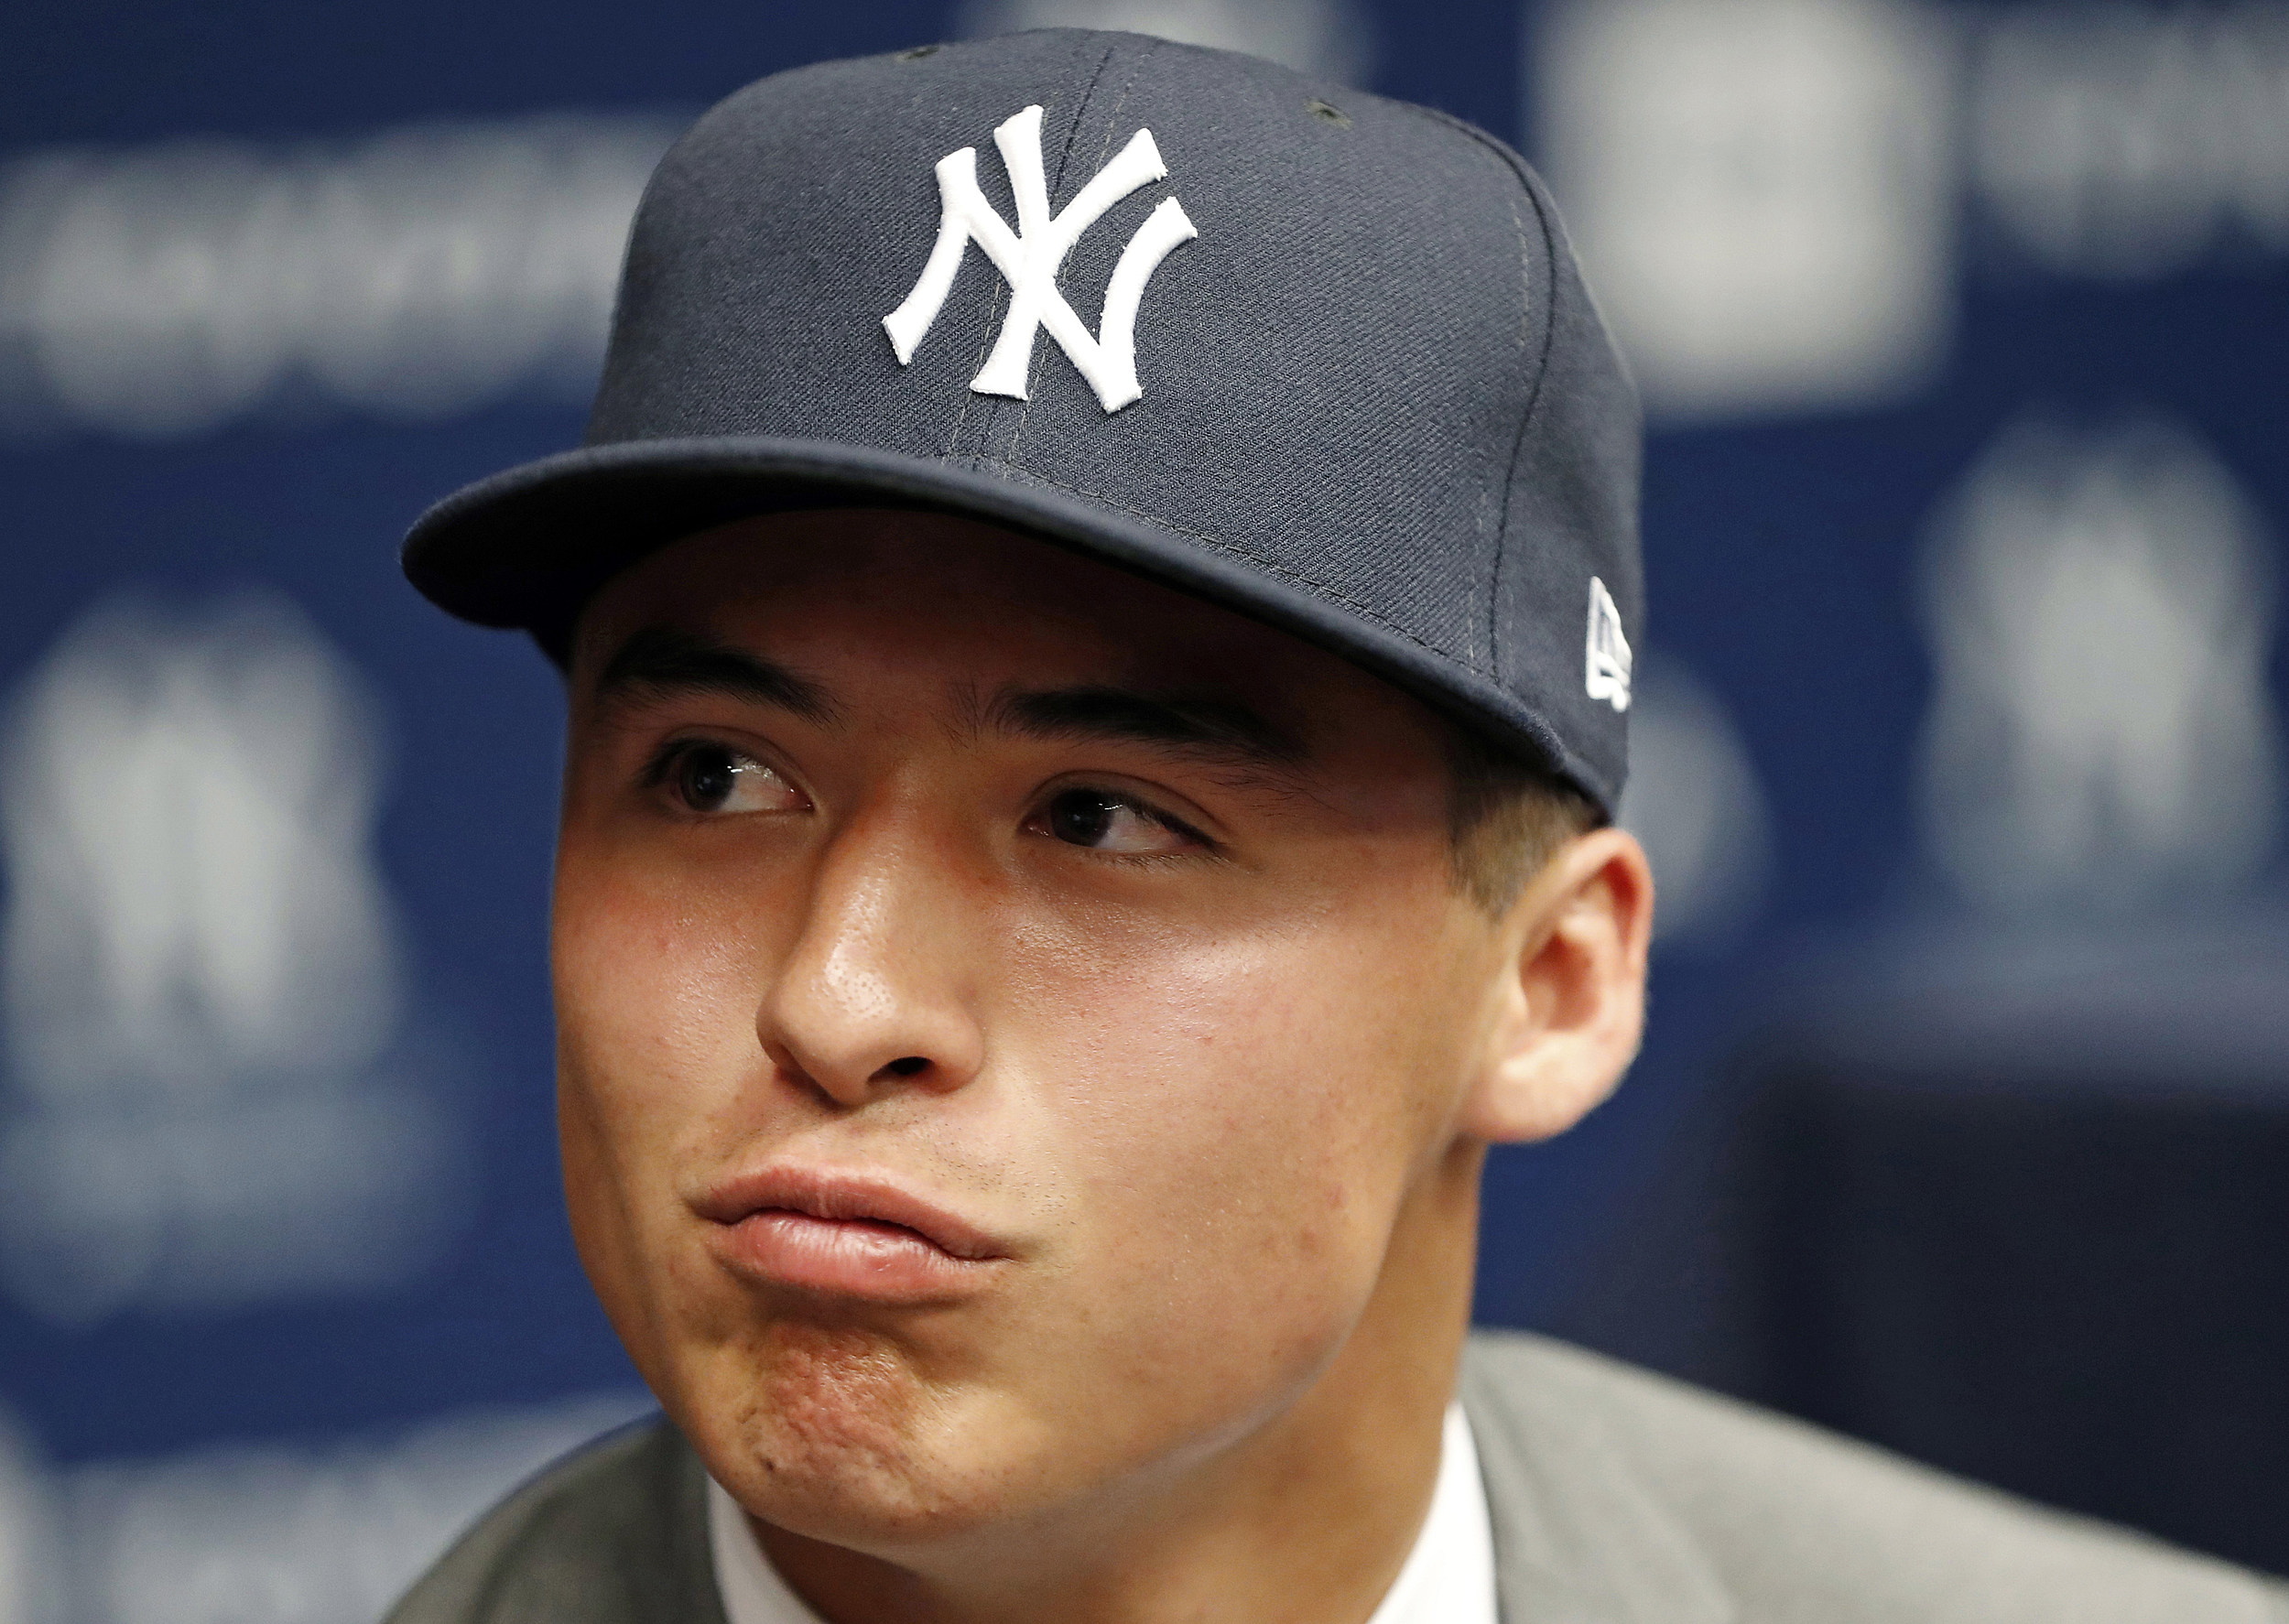 The New York Yankees' top prospect is a New Jersey native